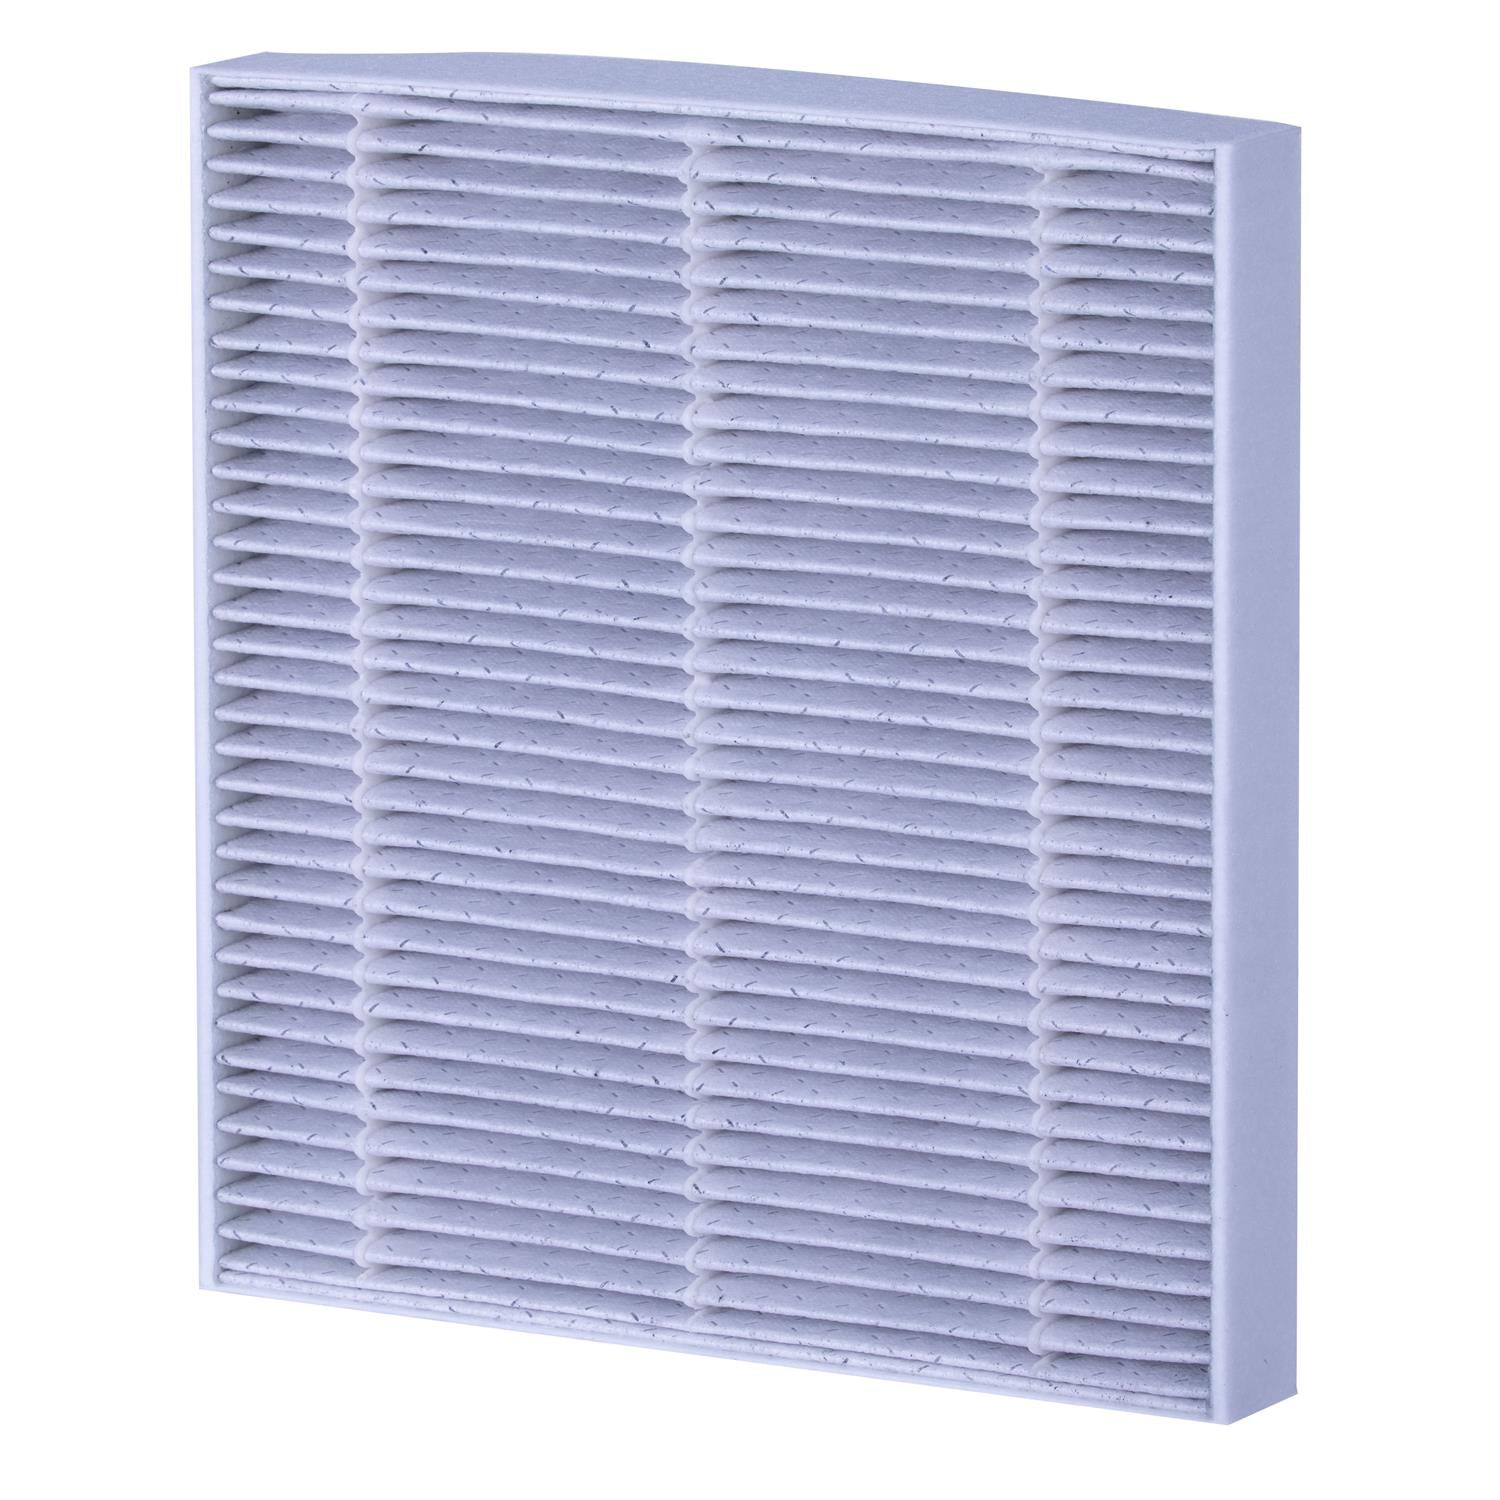 PUREFLOW 2020 Audi A3 Quattro Cabin Air Filter with HEPA and Antibacterial Technology, PC99204HX